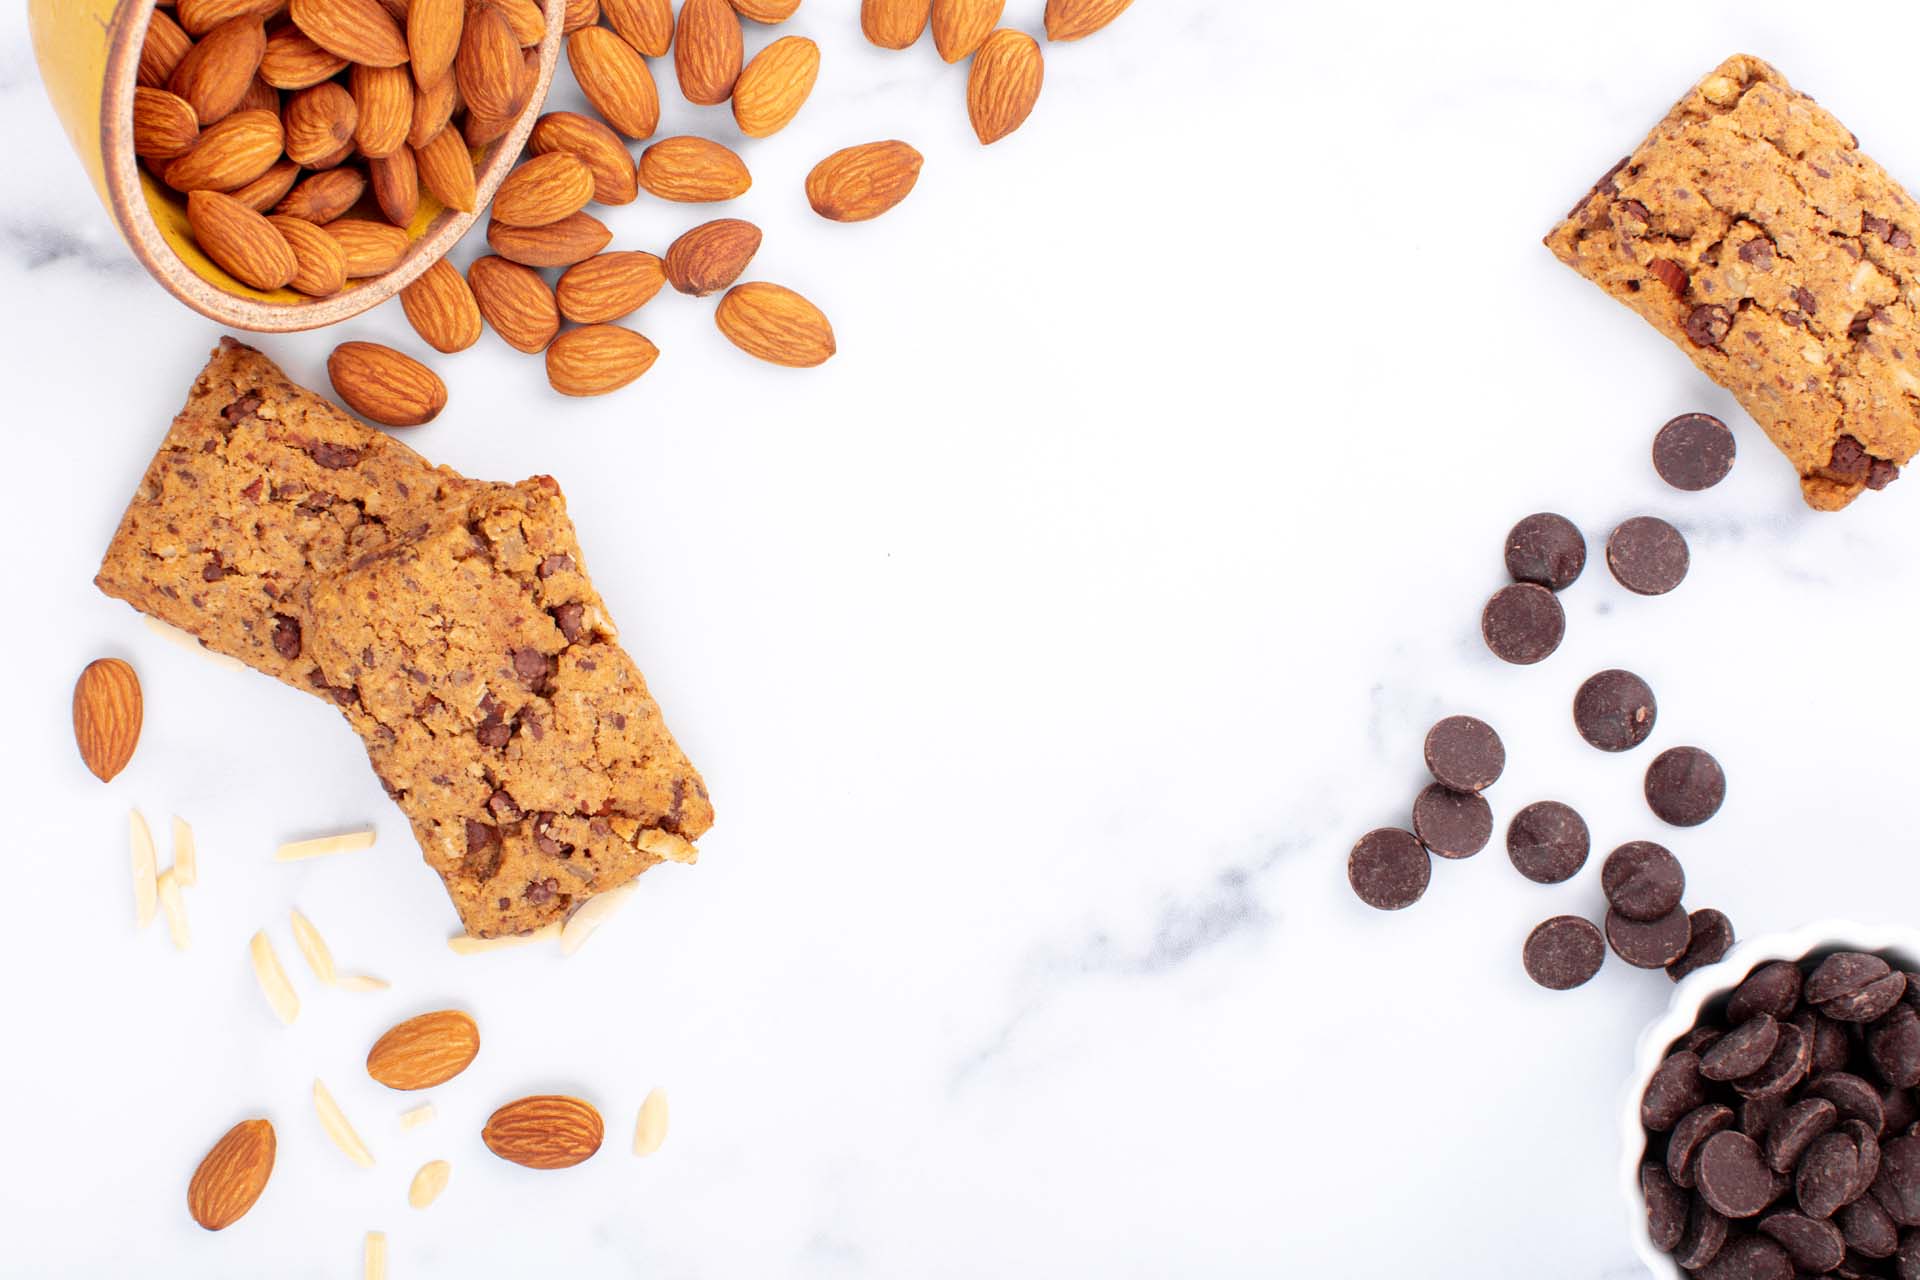 Whole Almonds with Soft Almond Snack Bars and Chocolate Chips - Treehouse Company Collaboration